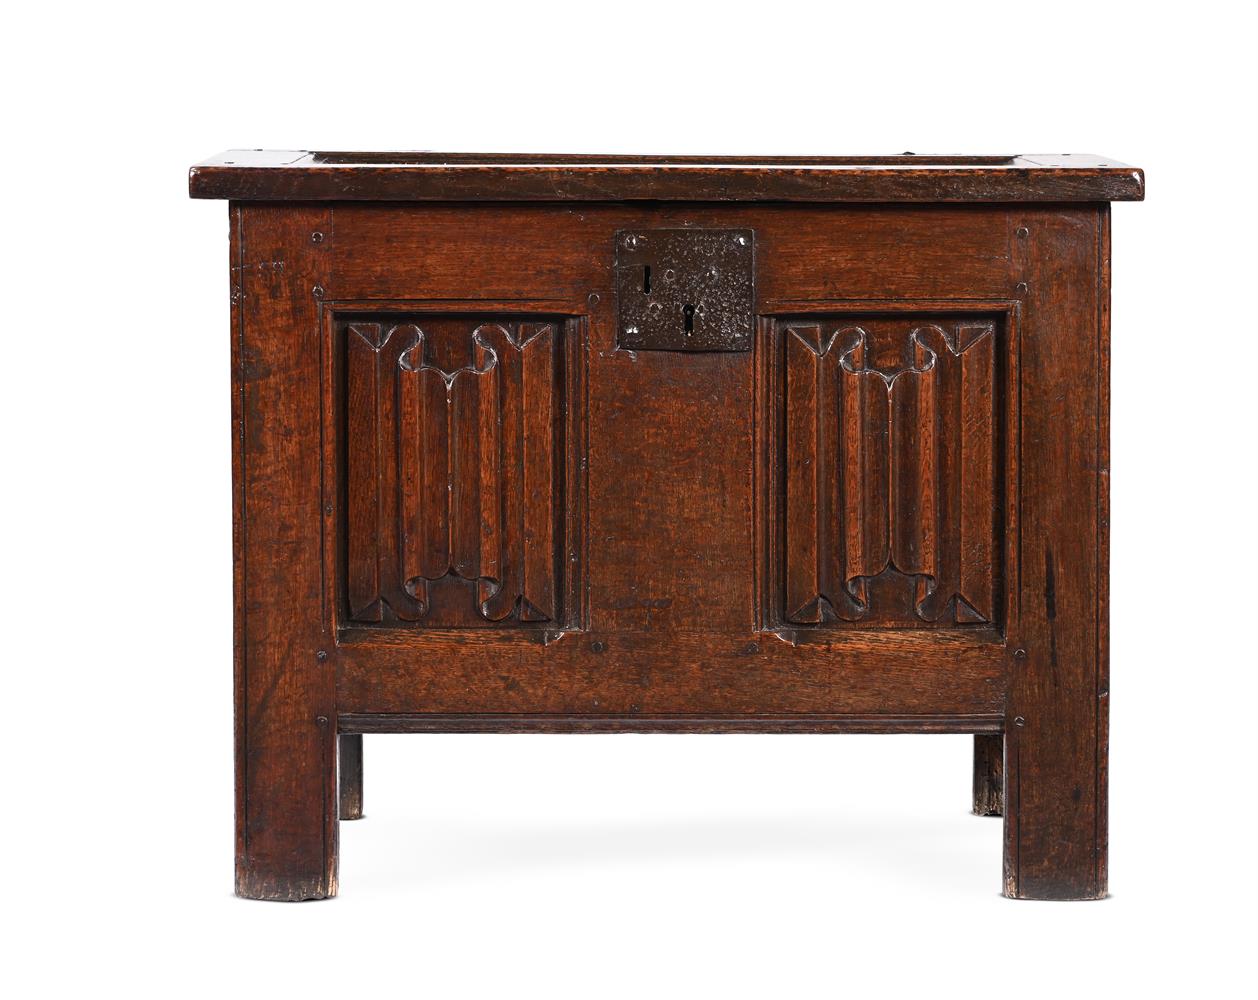 A SMALL ELIZABETHAN OAK COFFER, LATE 16TH OR EARLY 17TH CENTURY - Image 2 of 2